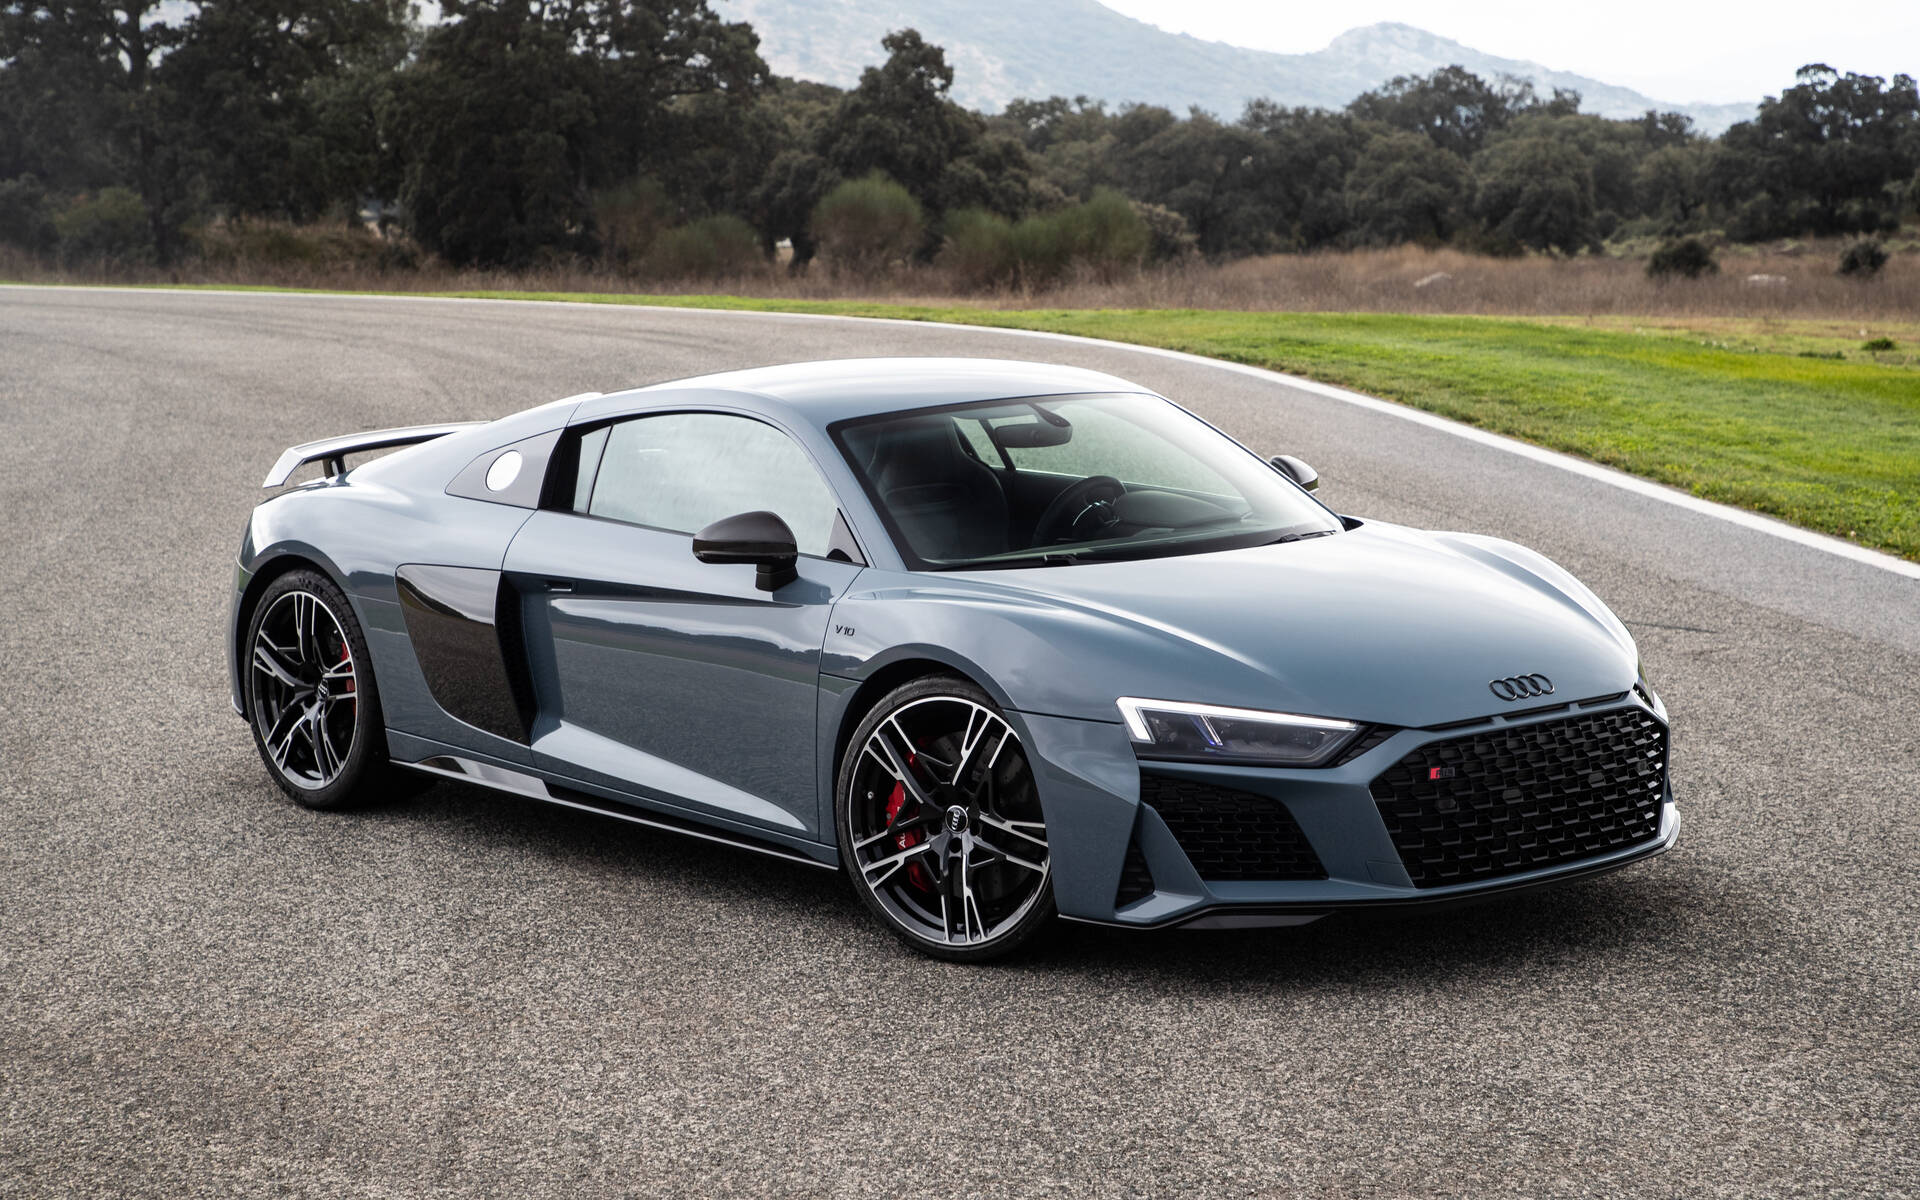 How Much Is It To Hire A Audi R8 In Dubai